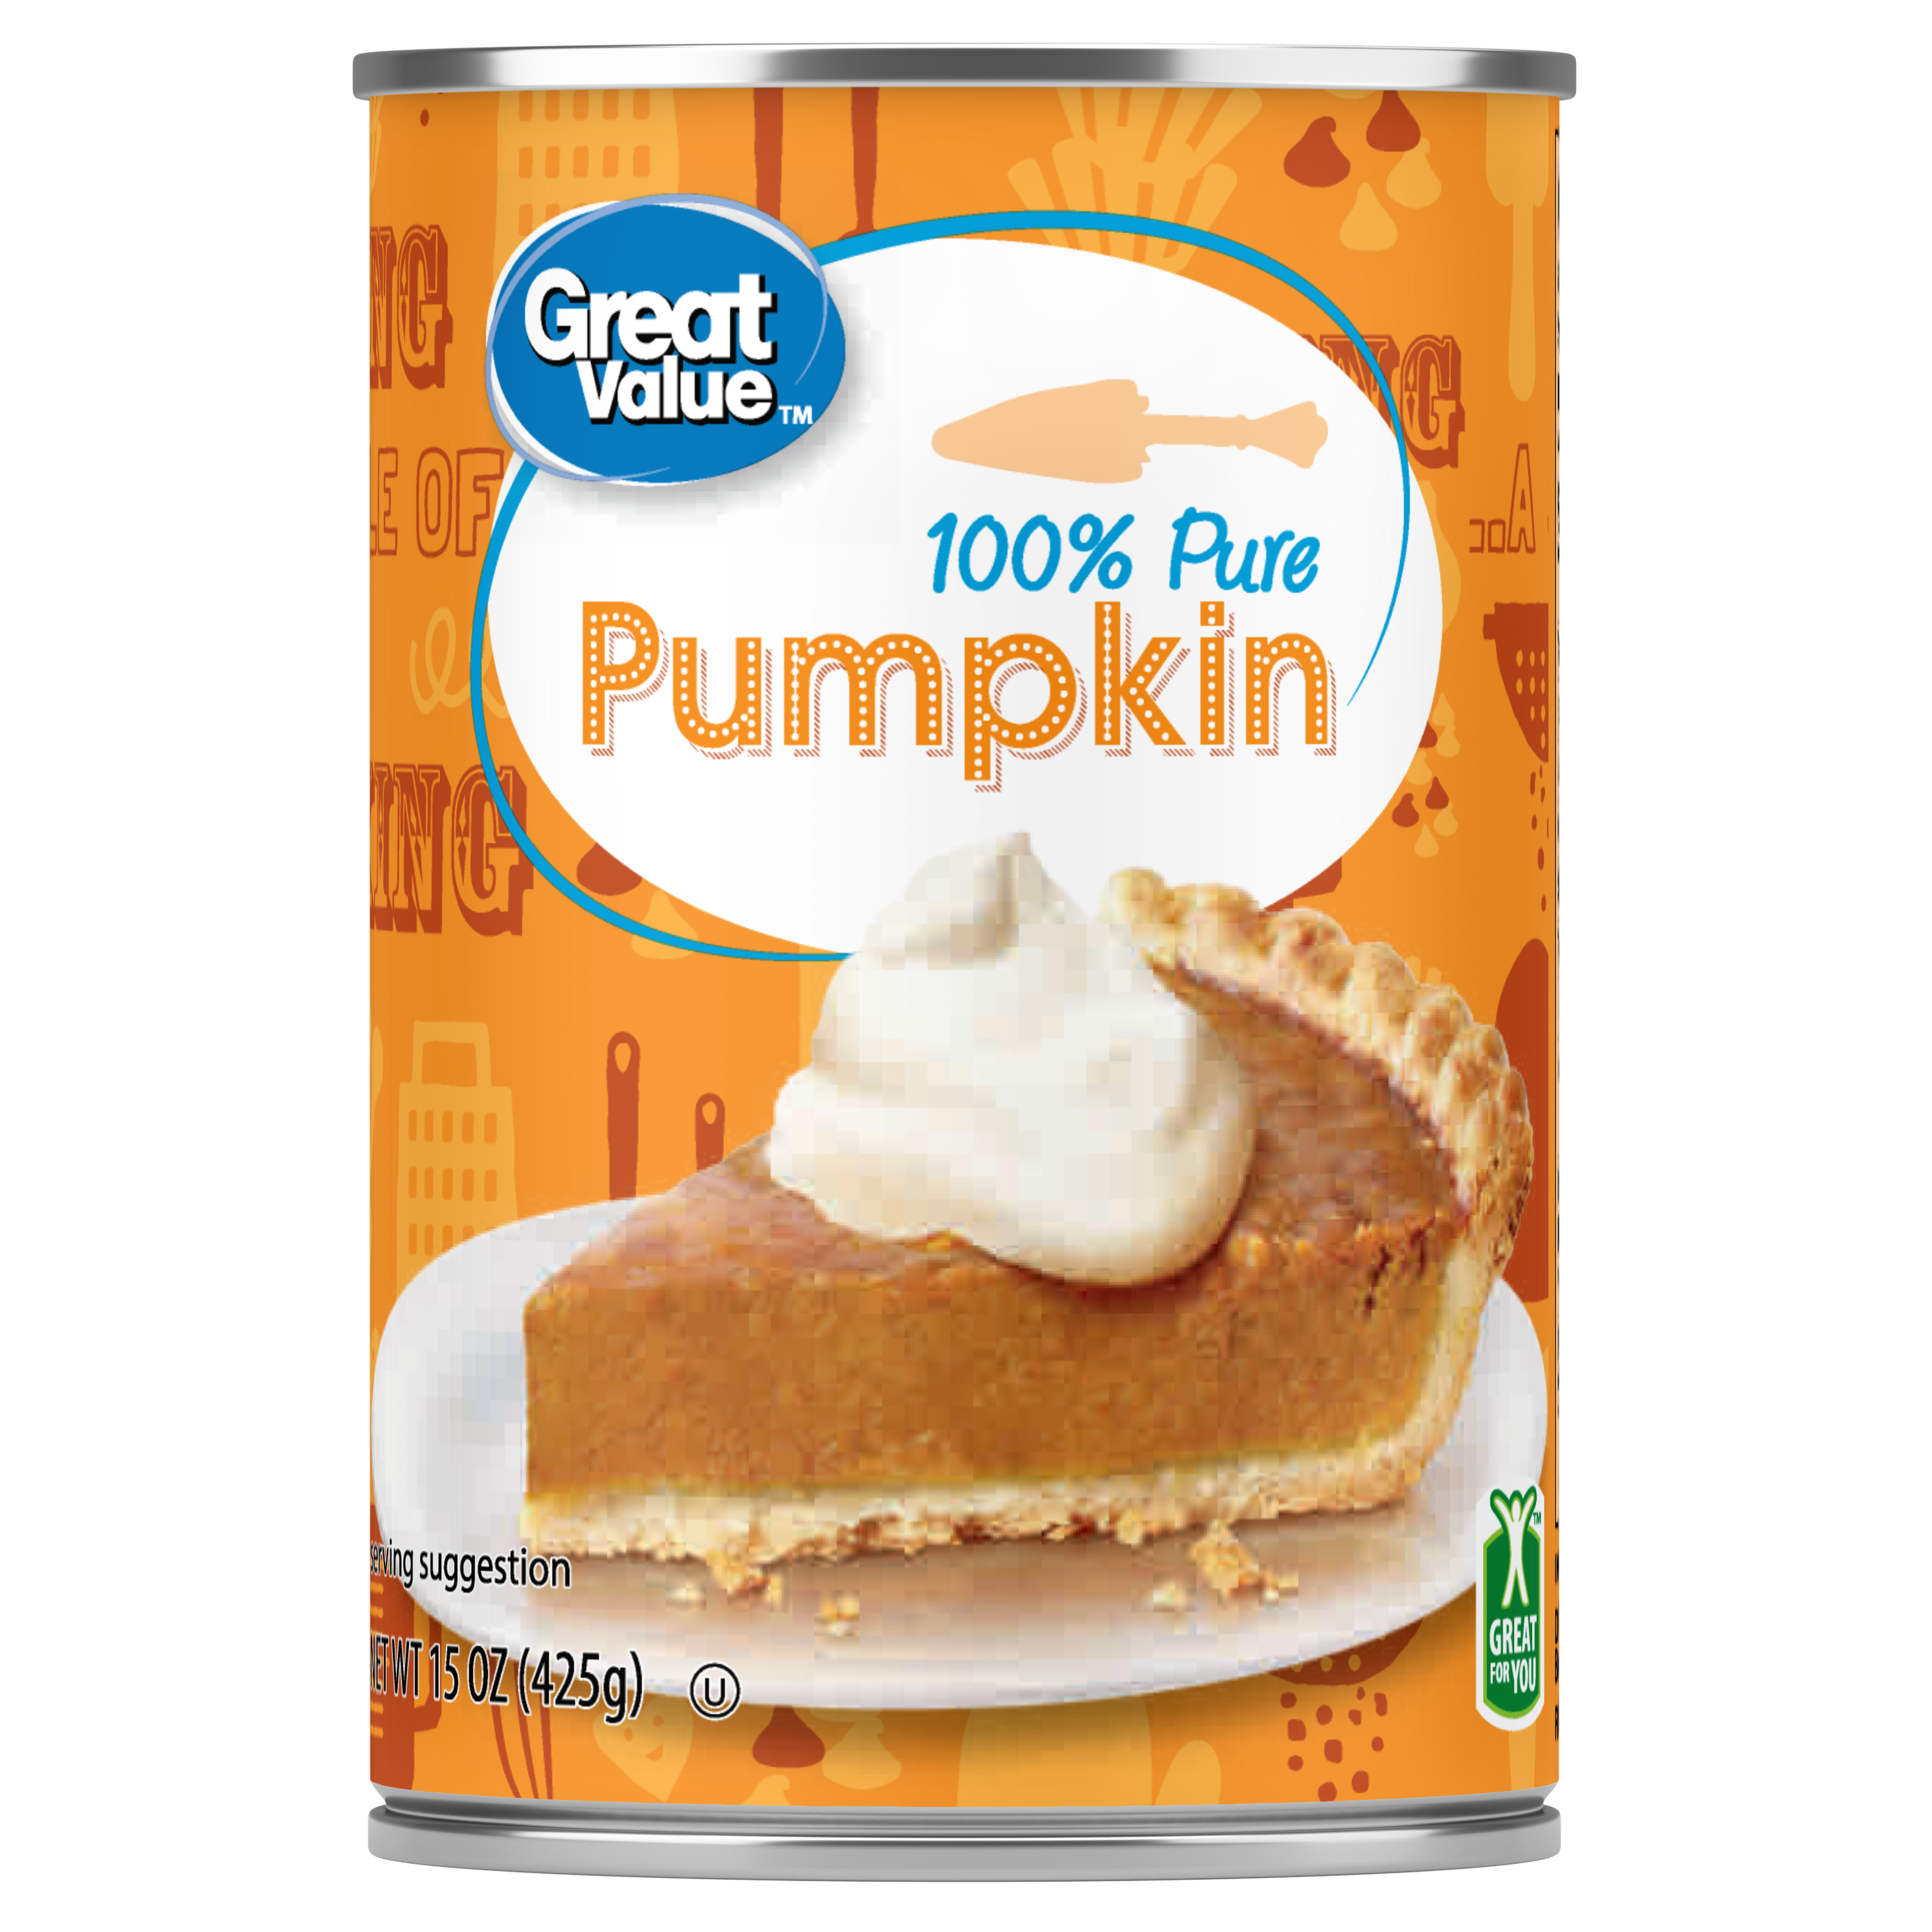 Great Value 100% Pure Pumpkin, 15 oz - image 1 of 9